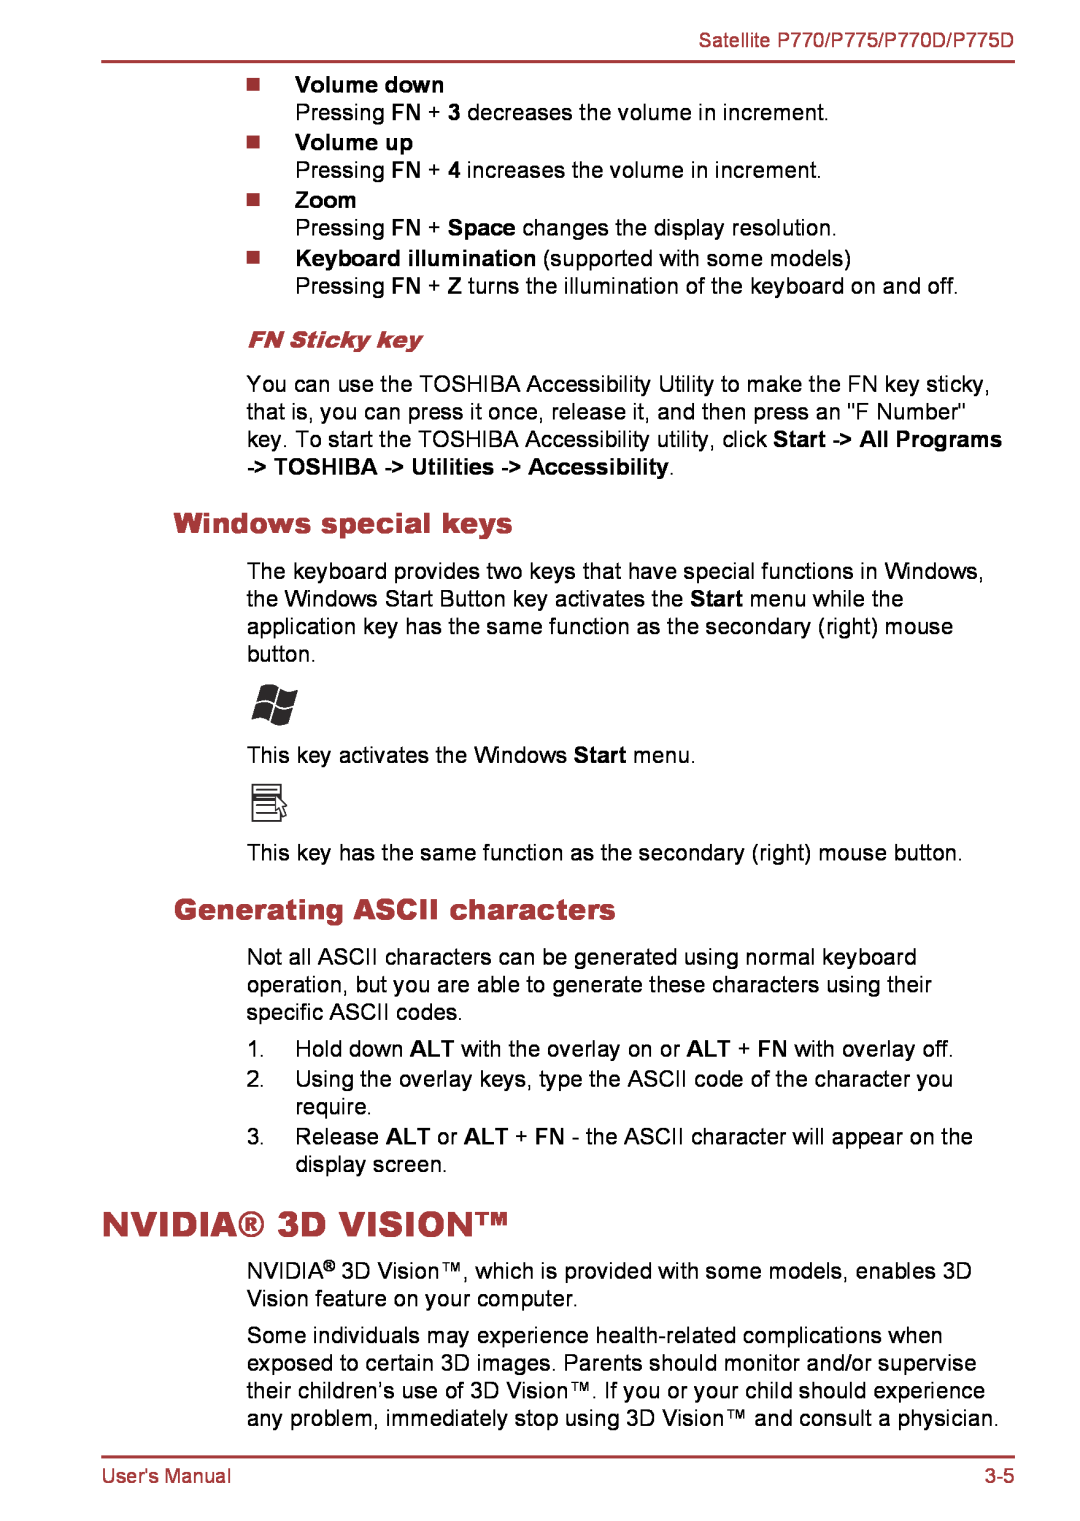 Toshiba P770 user manual NVIDIA 3D VISION, Windows special keys, Generating ASCII characters, Volume down, Volume up, Zoom 